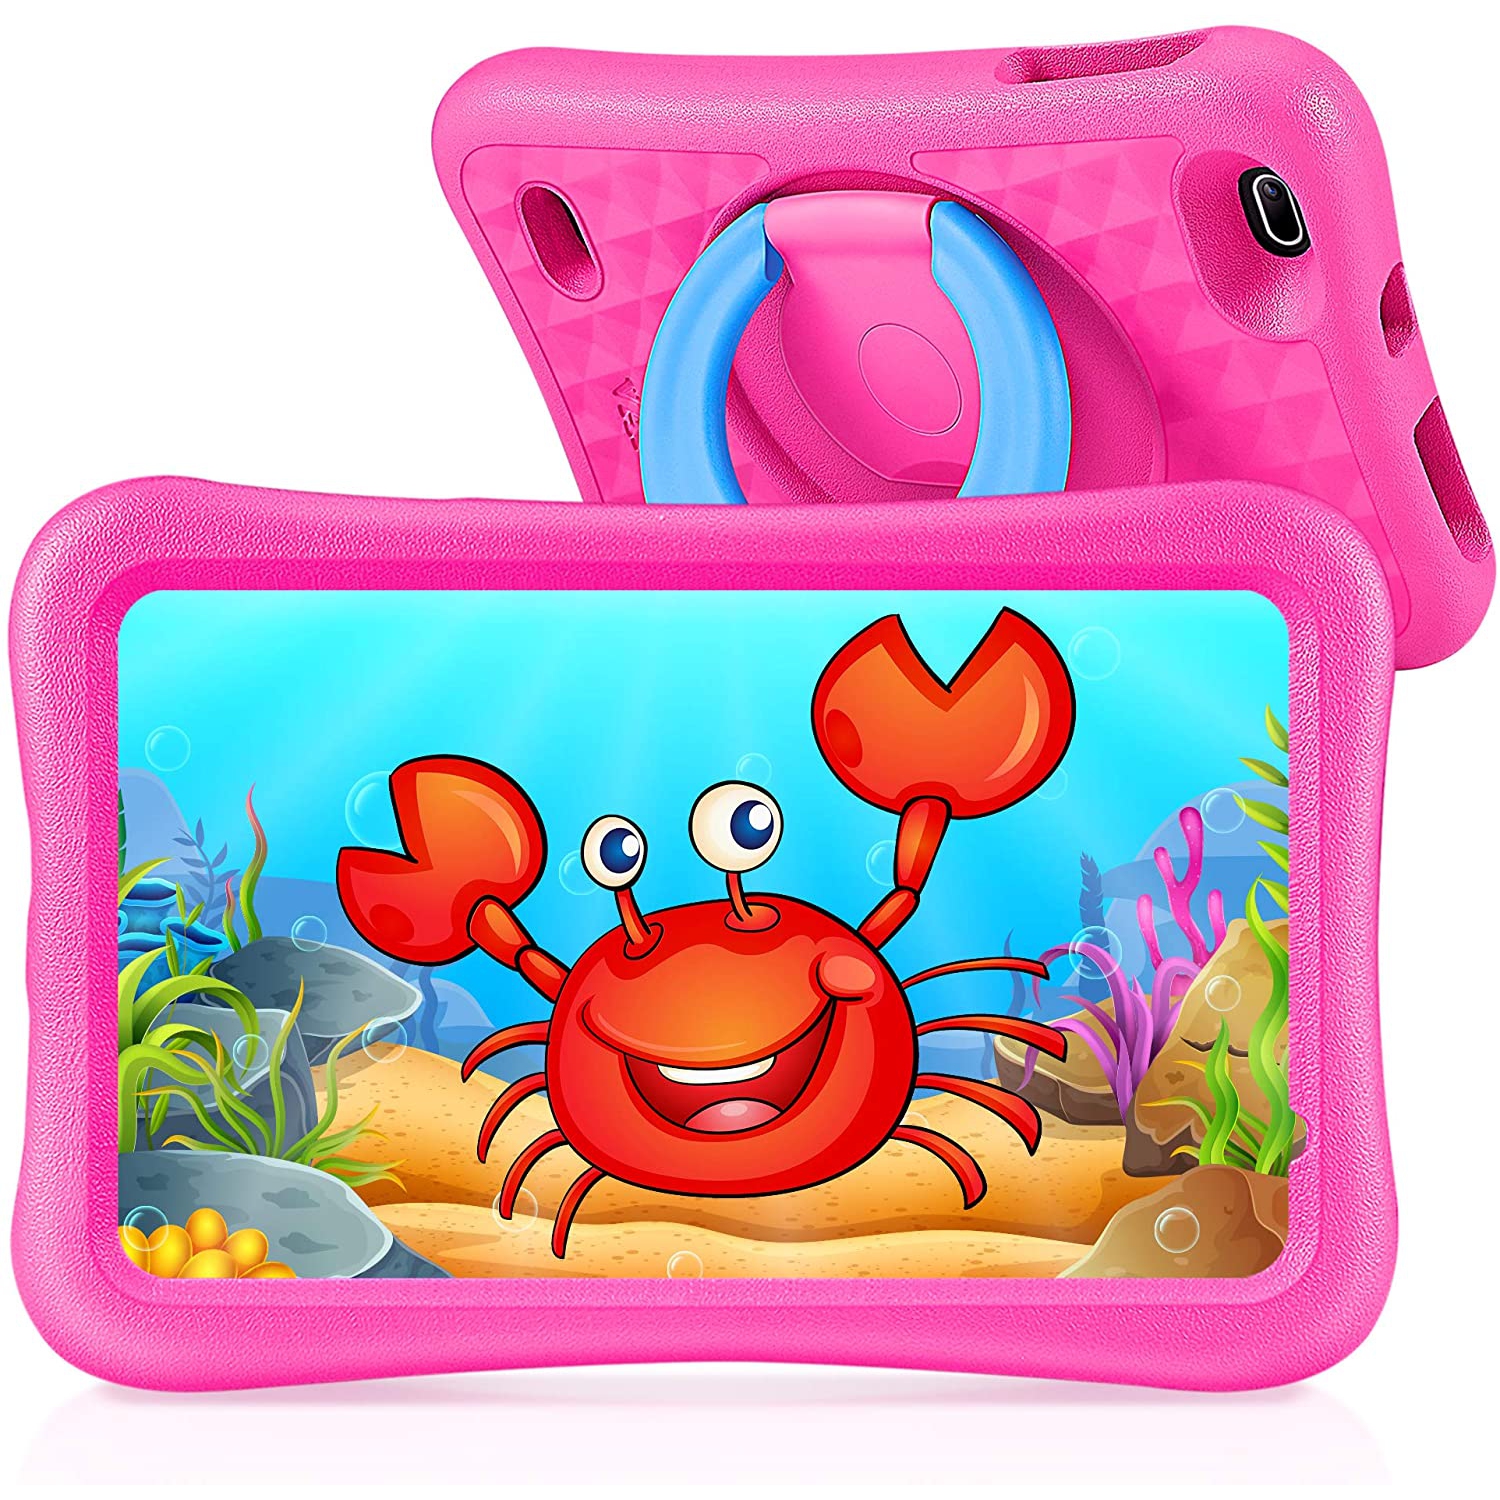 Vankyo S8 Kids Tablet, 8 inch, Android OS, WiFi Tablet, 32GB ROM,Kid-Proof Case, Pink